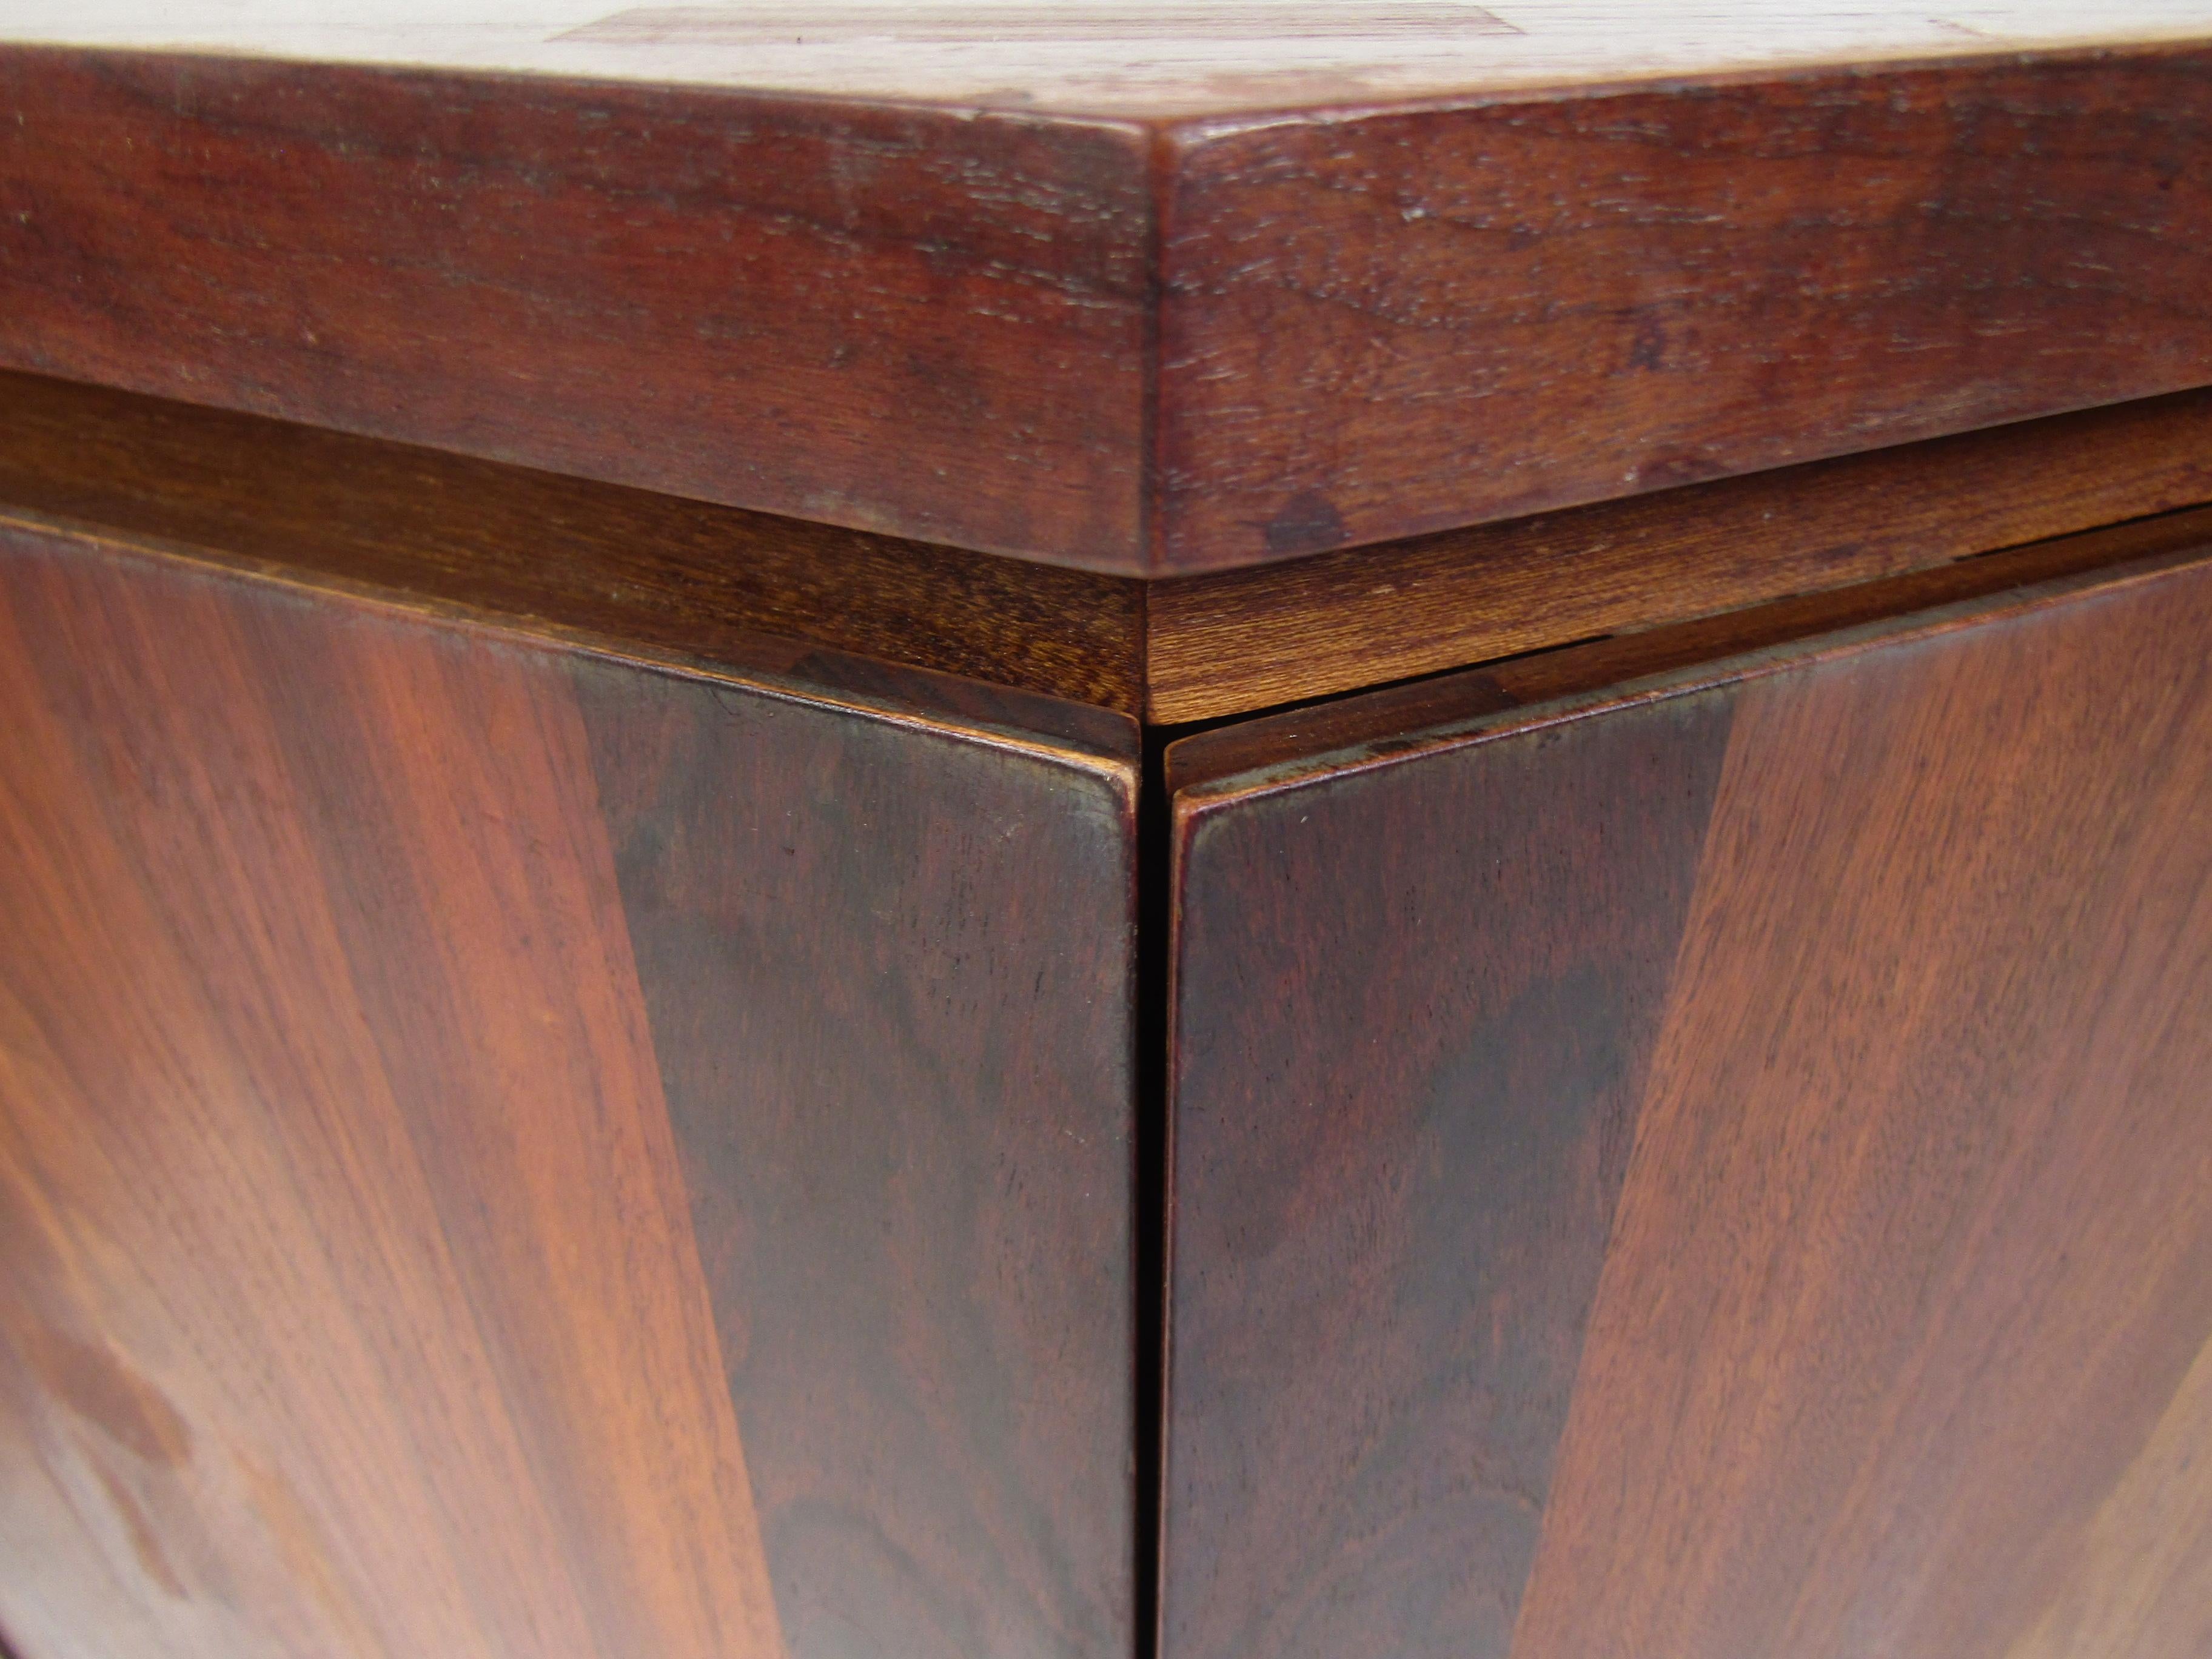 20th Century Pair of Midcentury Nightstands in Rosewood and Walnut